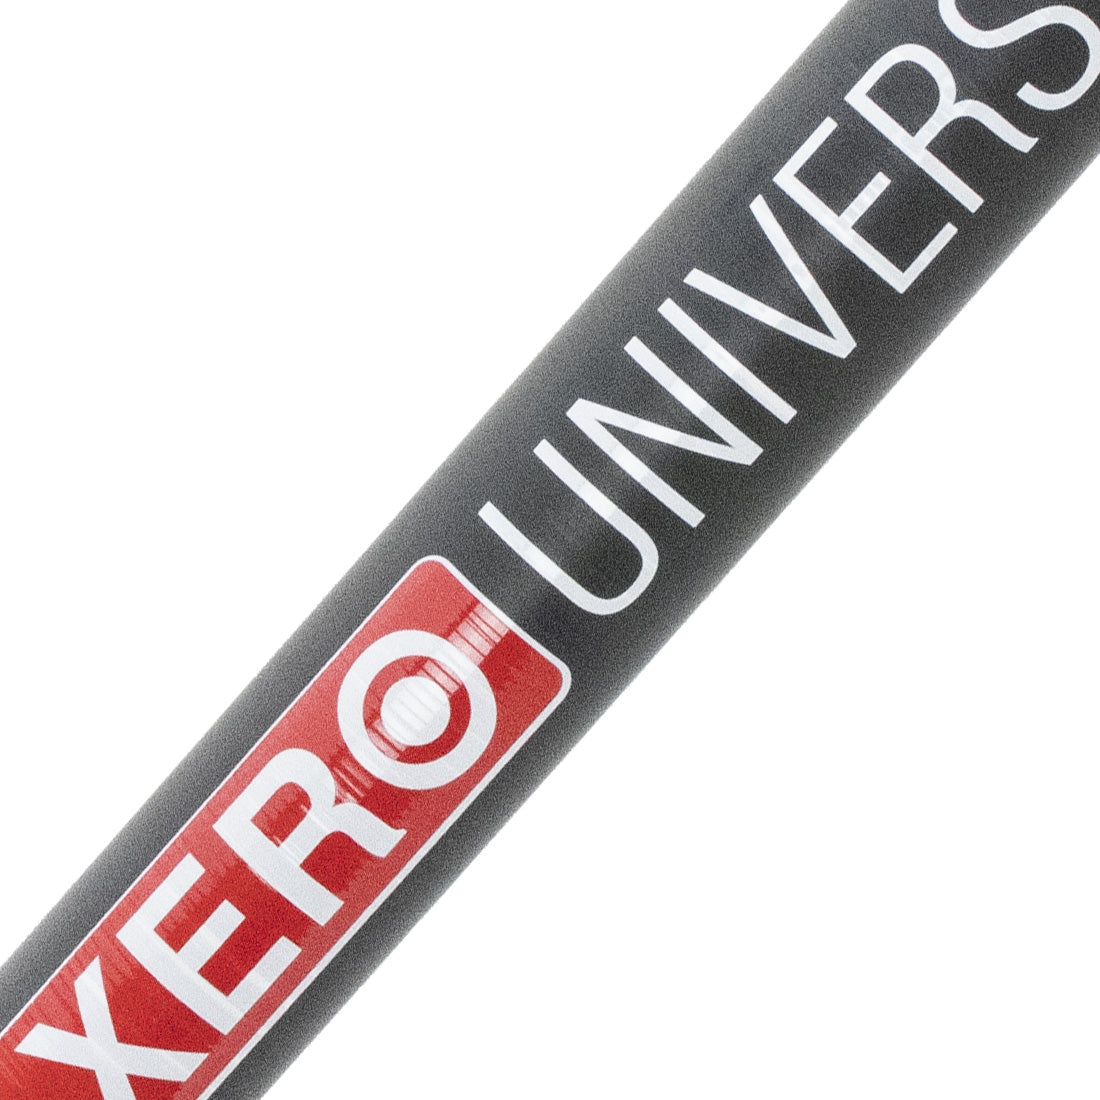 XERO Universal Extension - Decal Detailed Close Up View